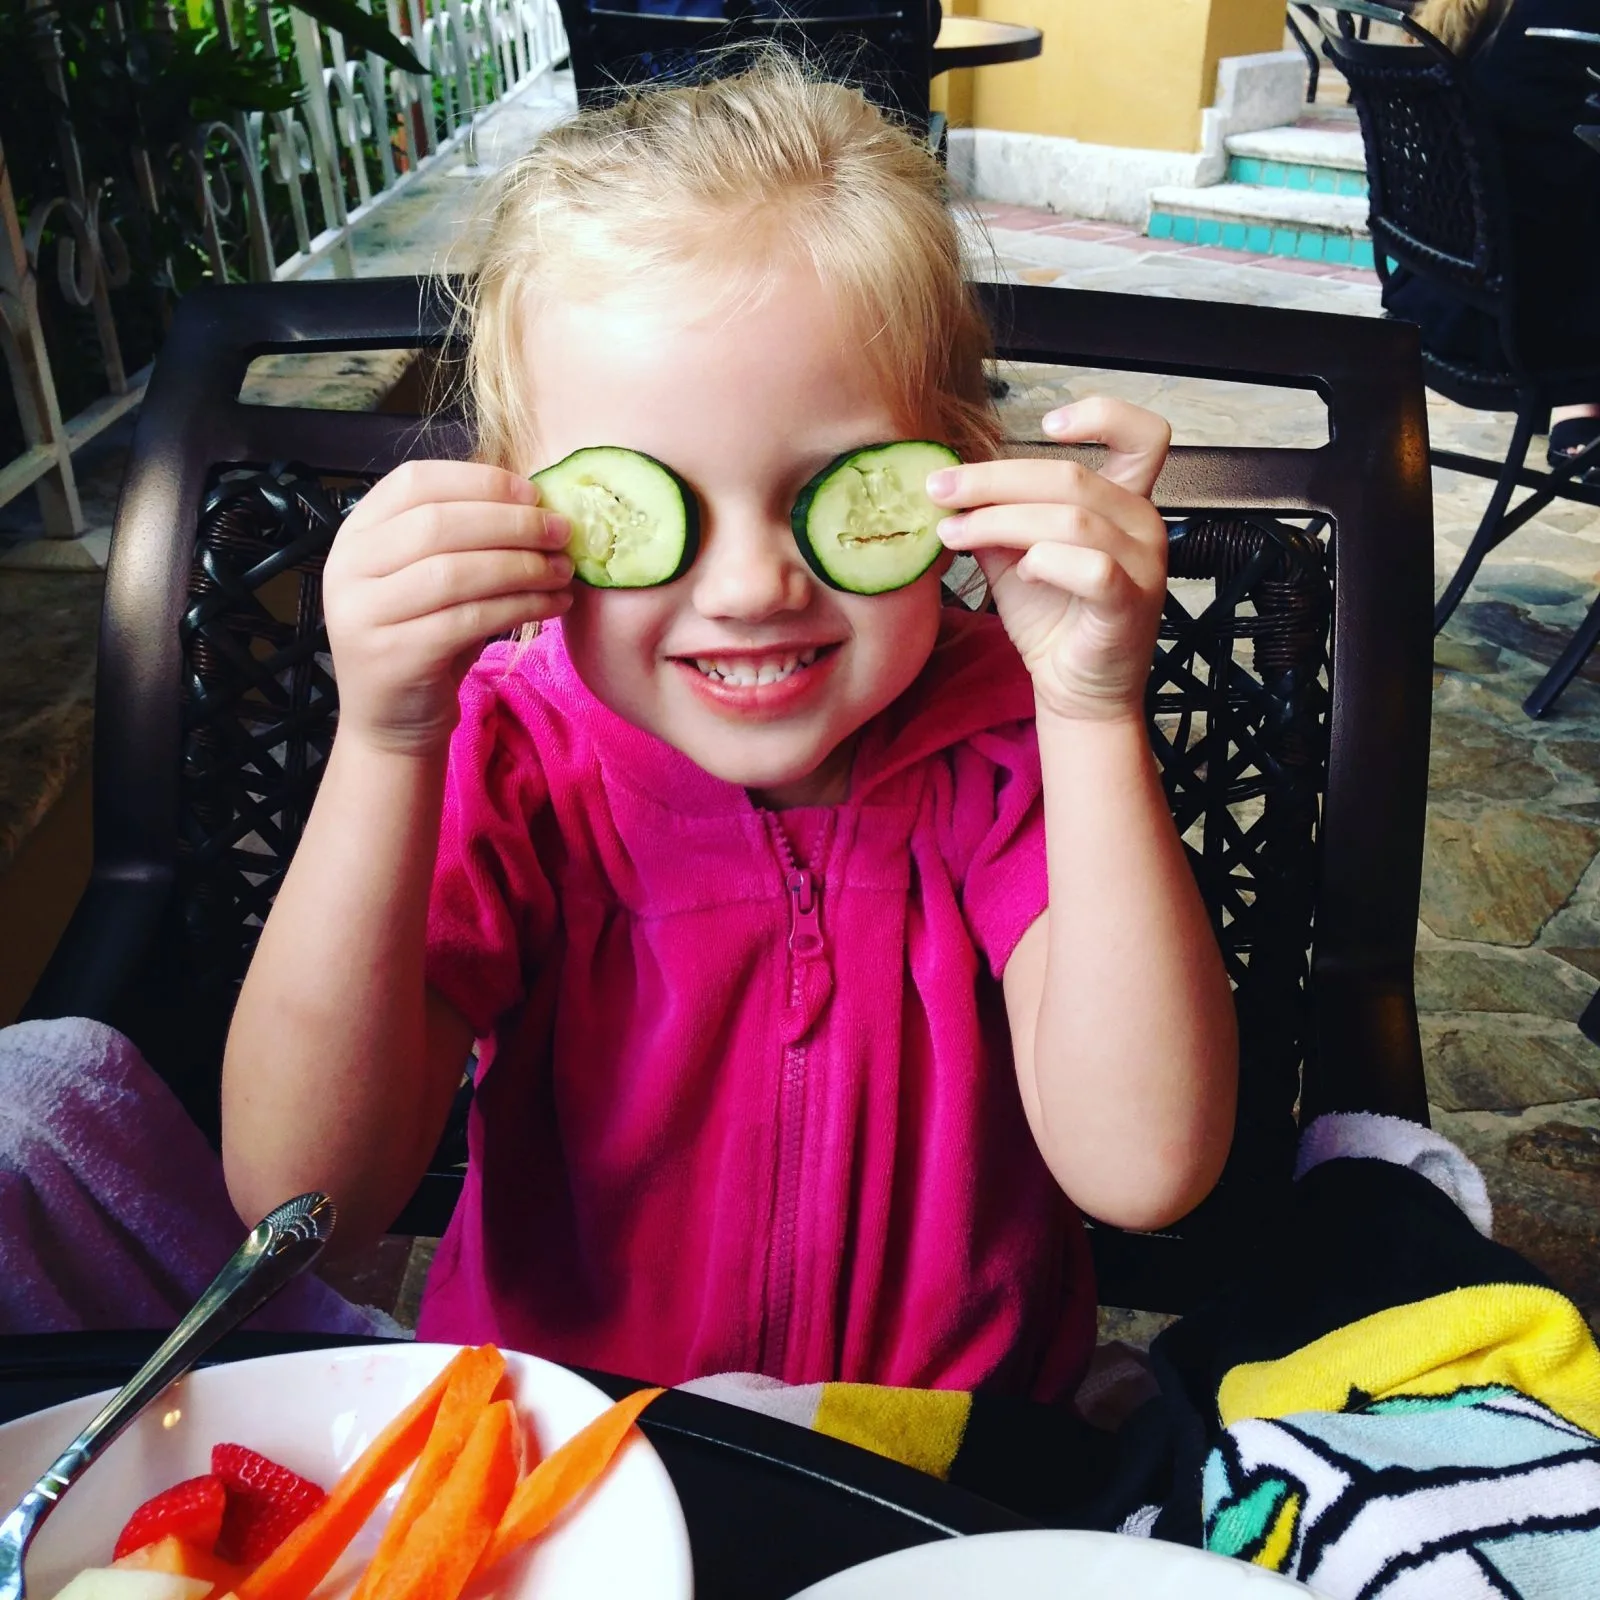 little girl playing with cucumbers over her eyes